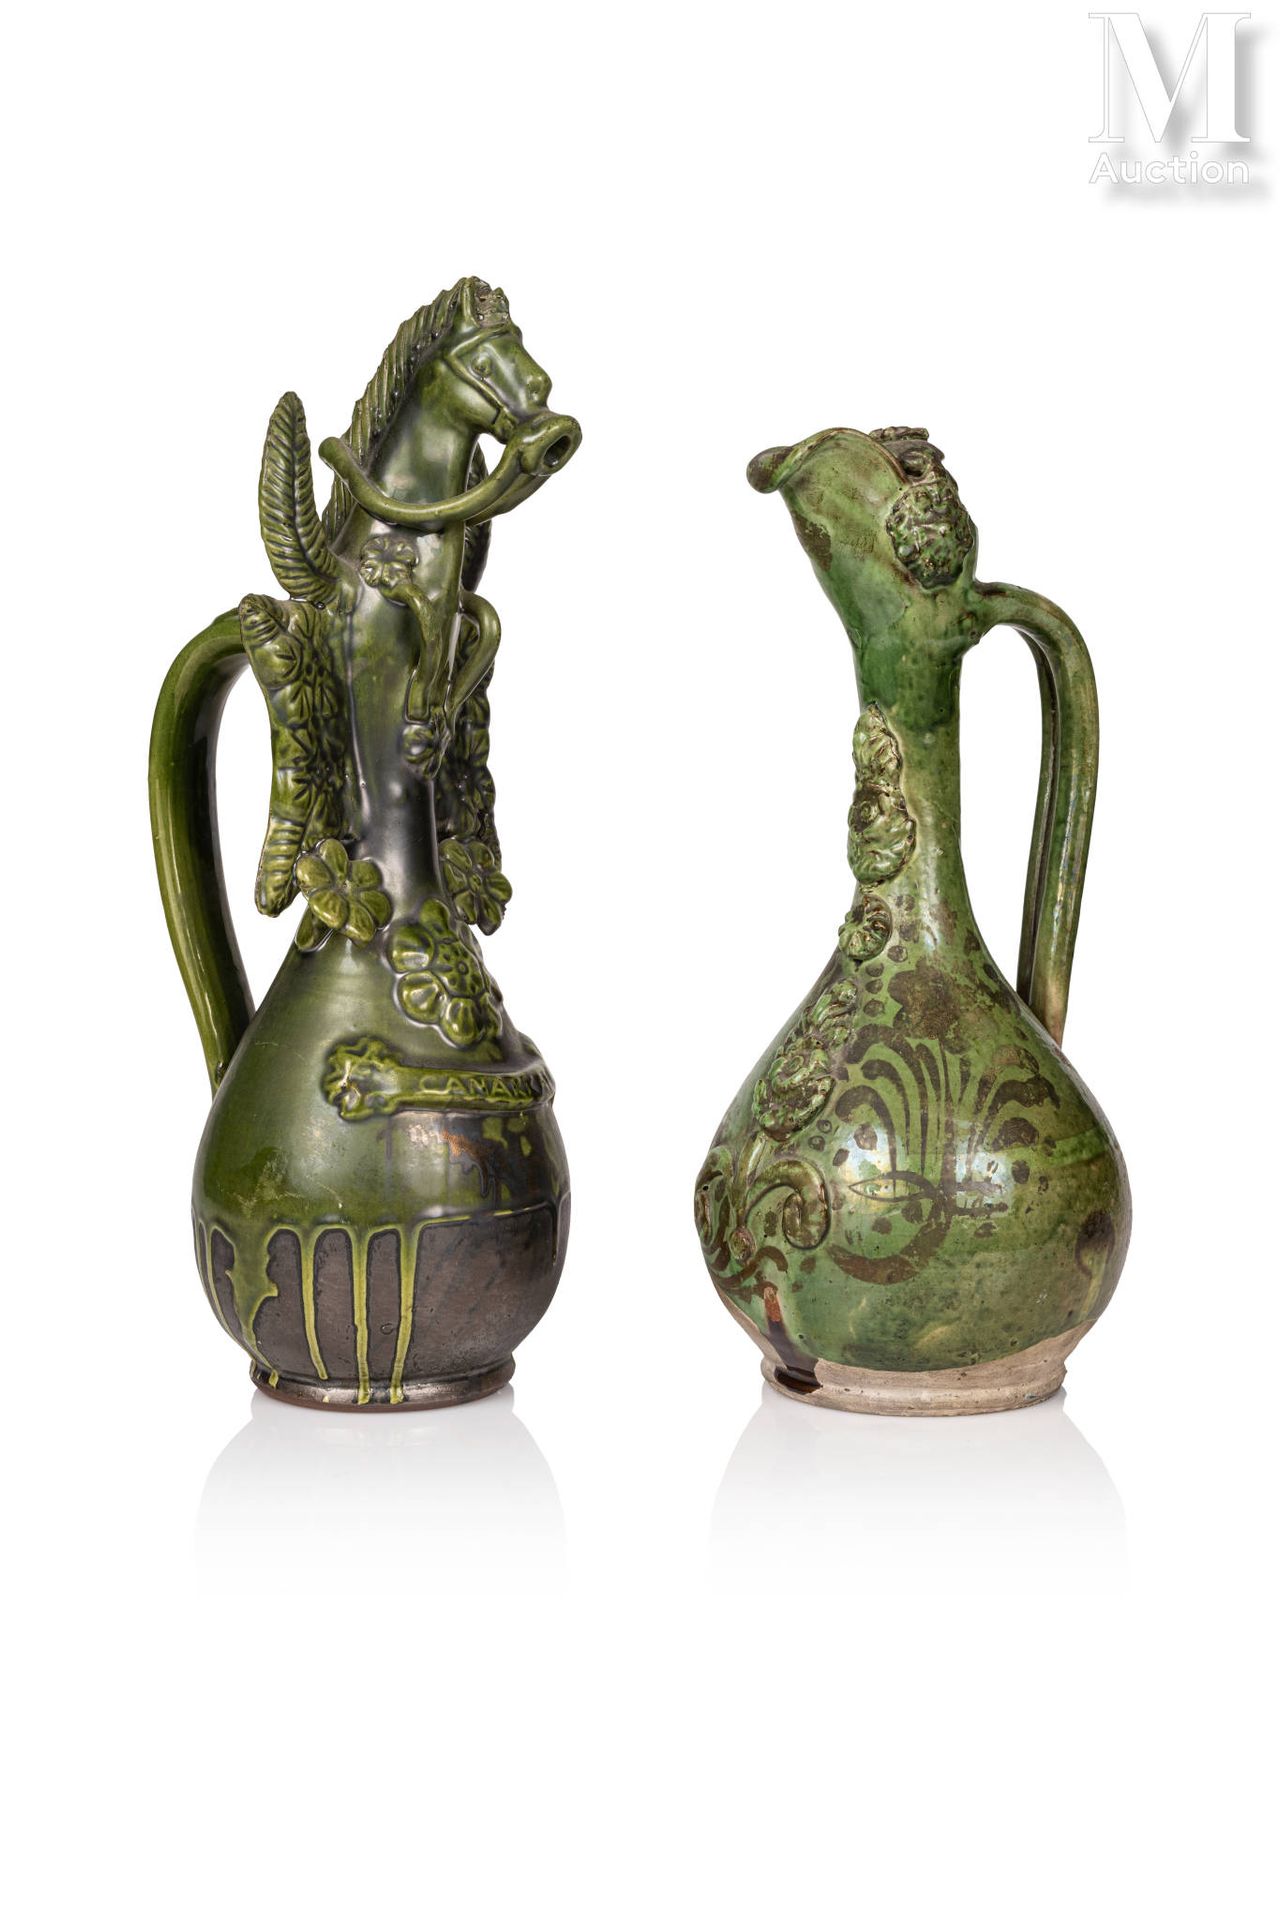 Deux carafes ottomanes Turkey, Canakkalé, 19th-20th century
In green-glazed clay&hellip;